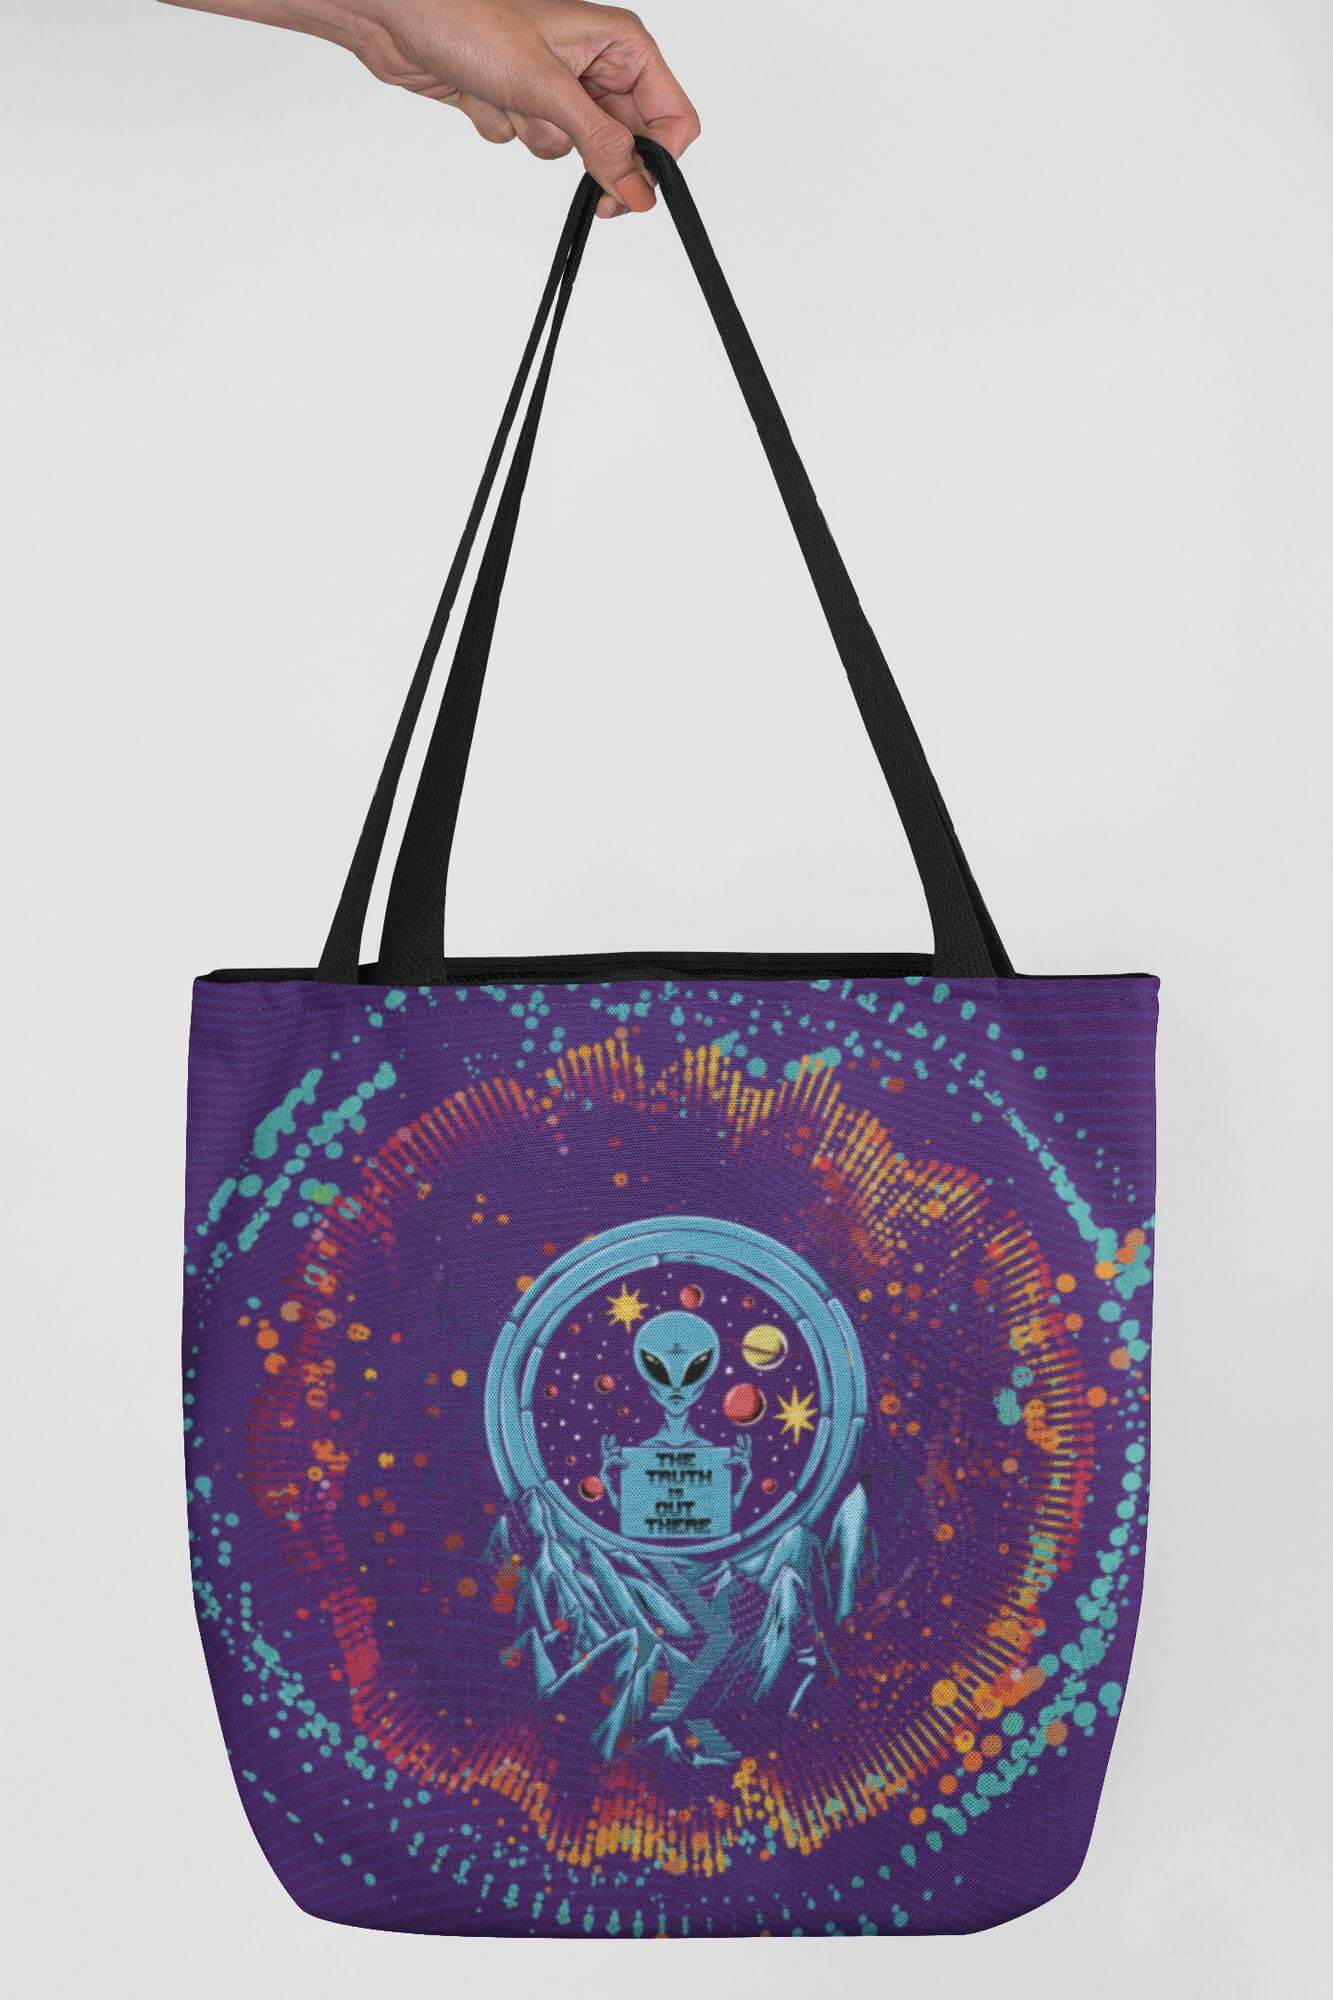 The Truth Is Out There Unisex Canvas Alien Tote Bag